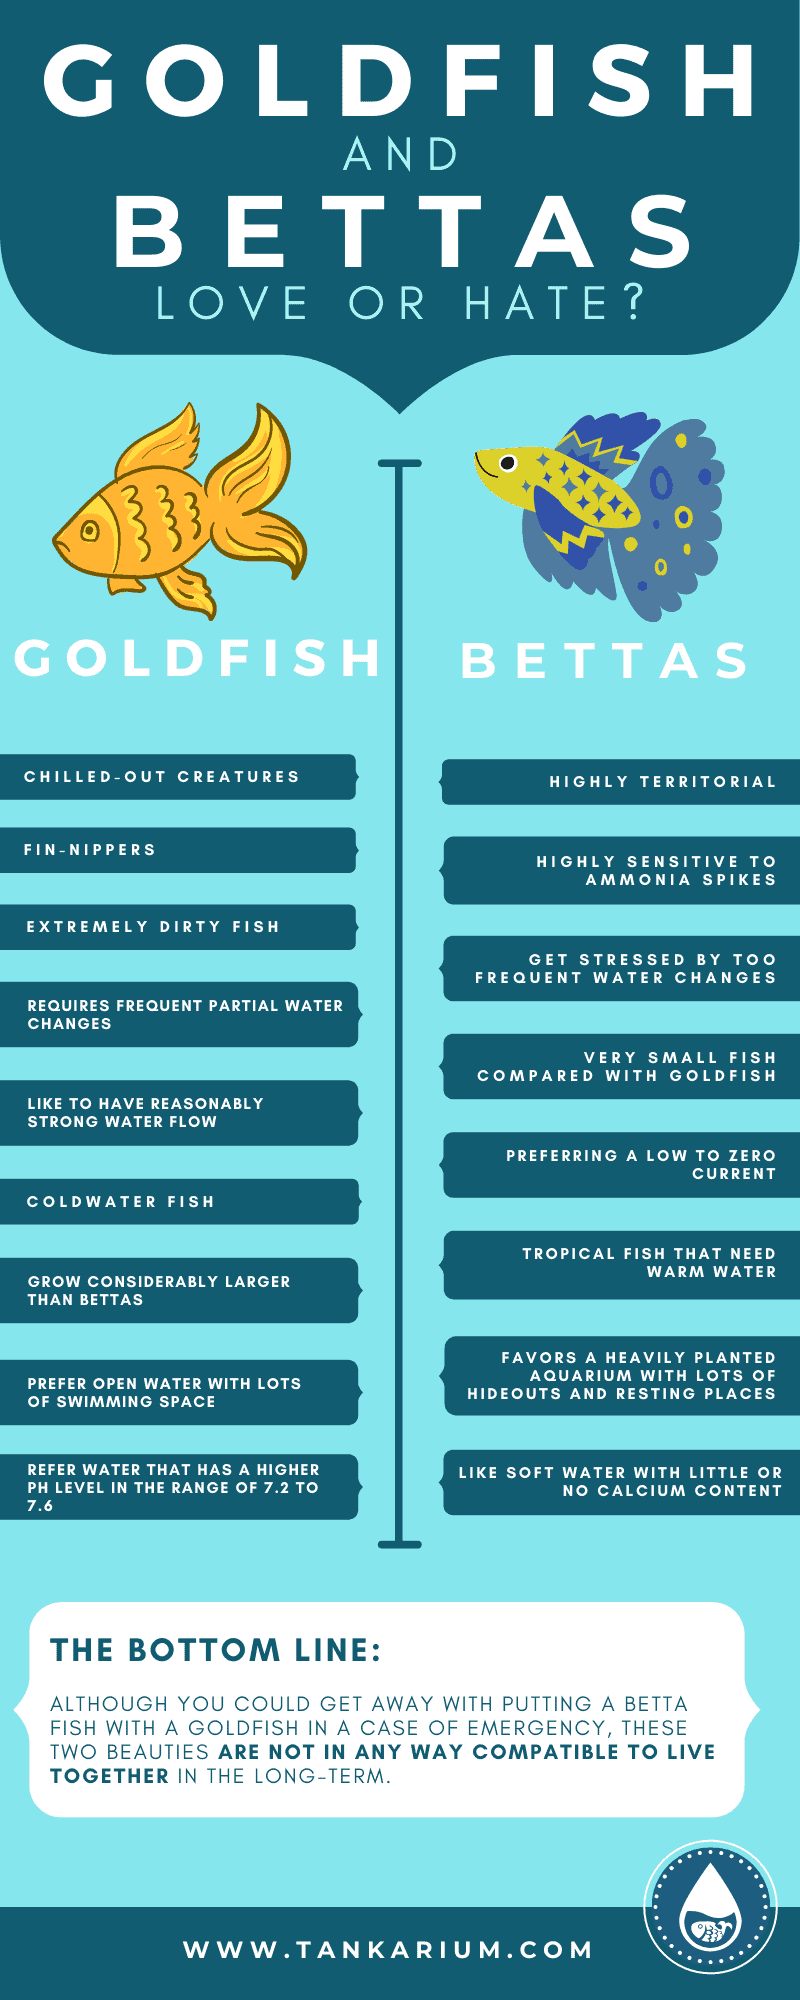 Goldfish And Bettas- Love Or Hate? - Infographic